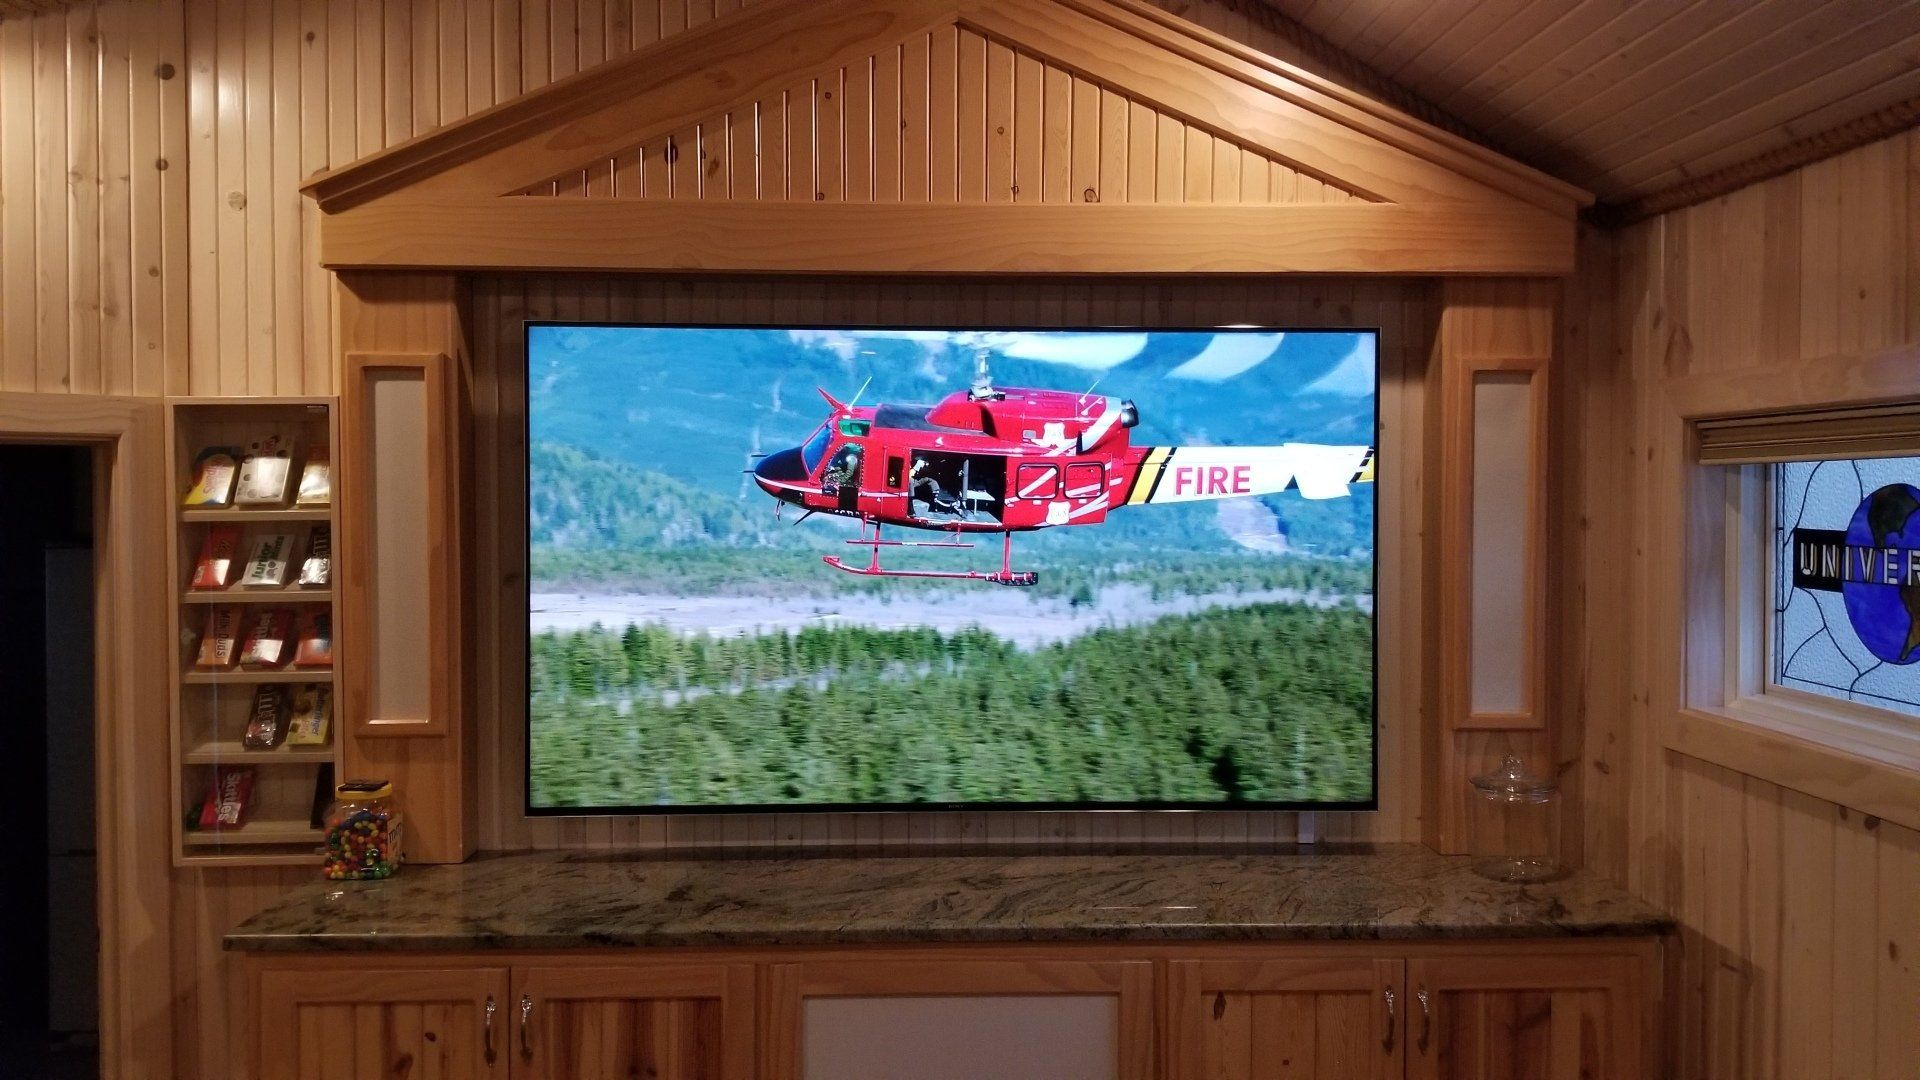 A large flat screen tv shows a helicopter flying over a forest